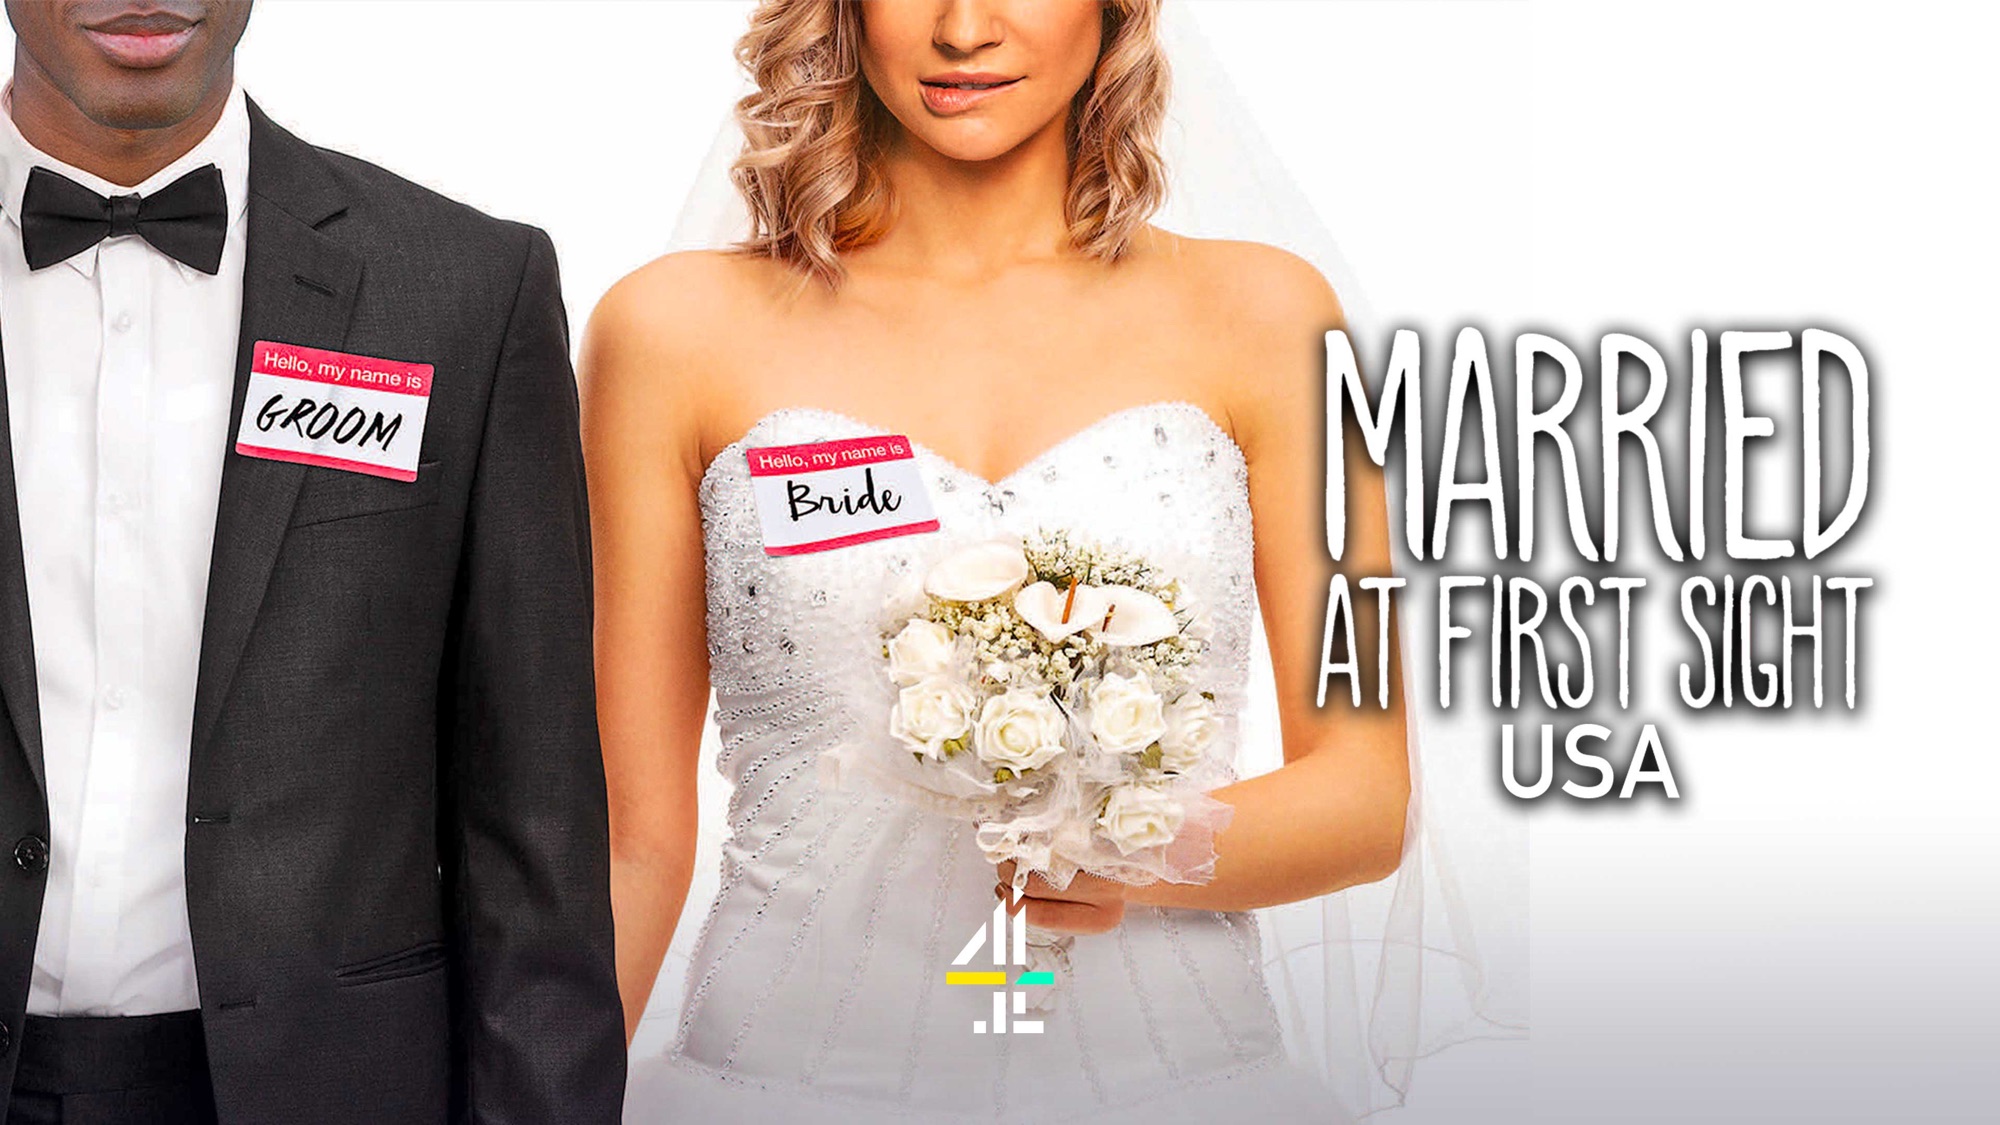 Married at First Sight USA Apple TV